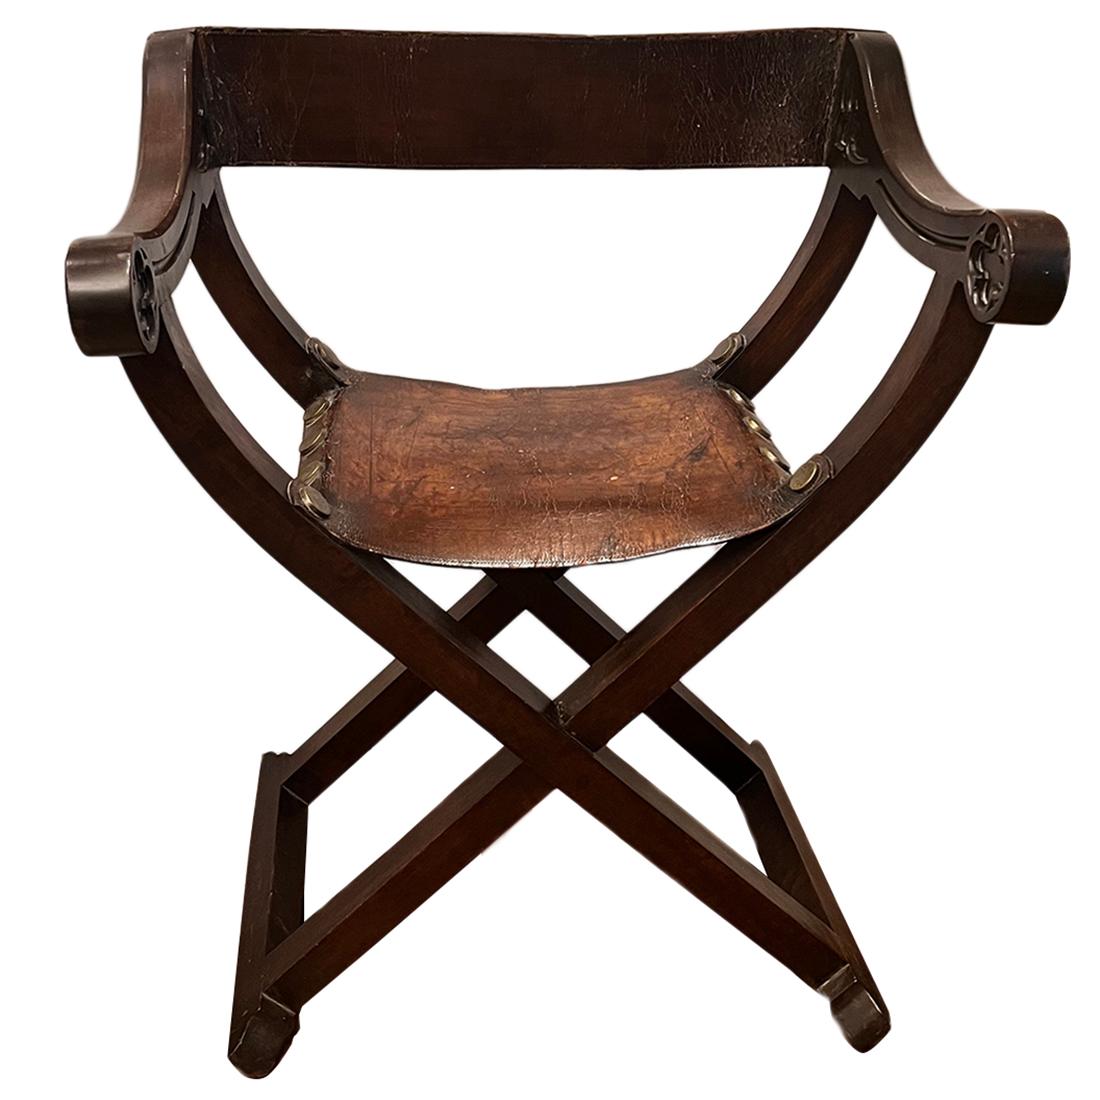 A circa 1900 Italian carved chair with leather seat and back.

Measurements:
Height: 34